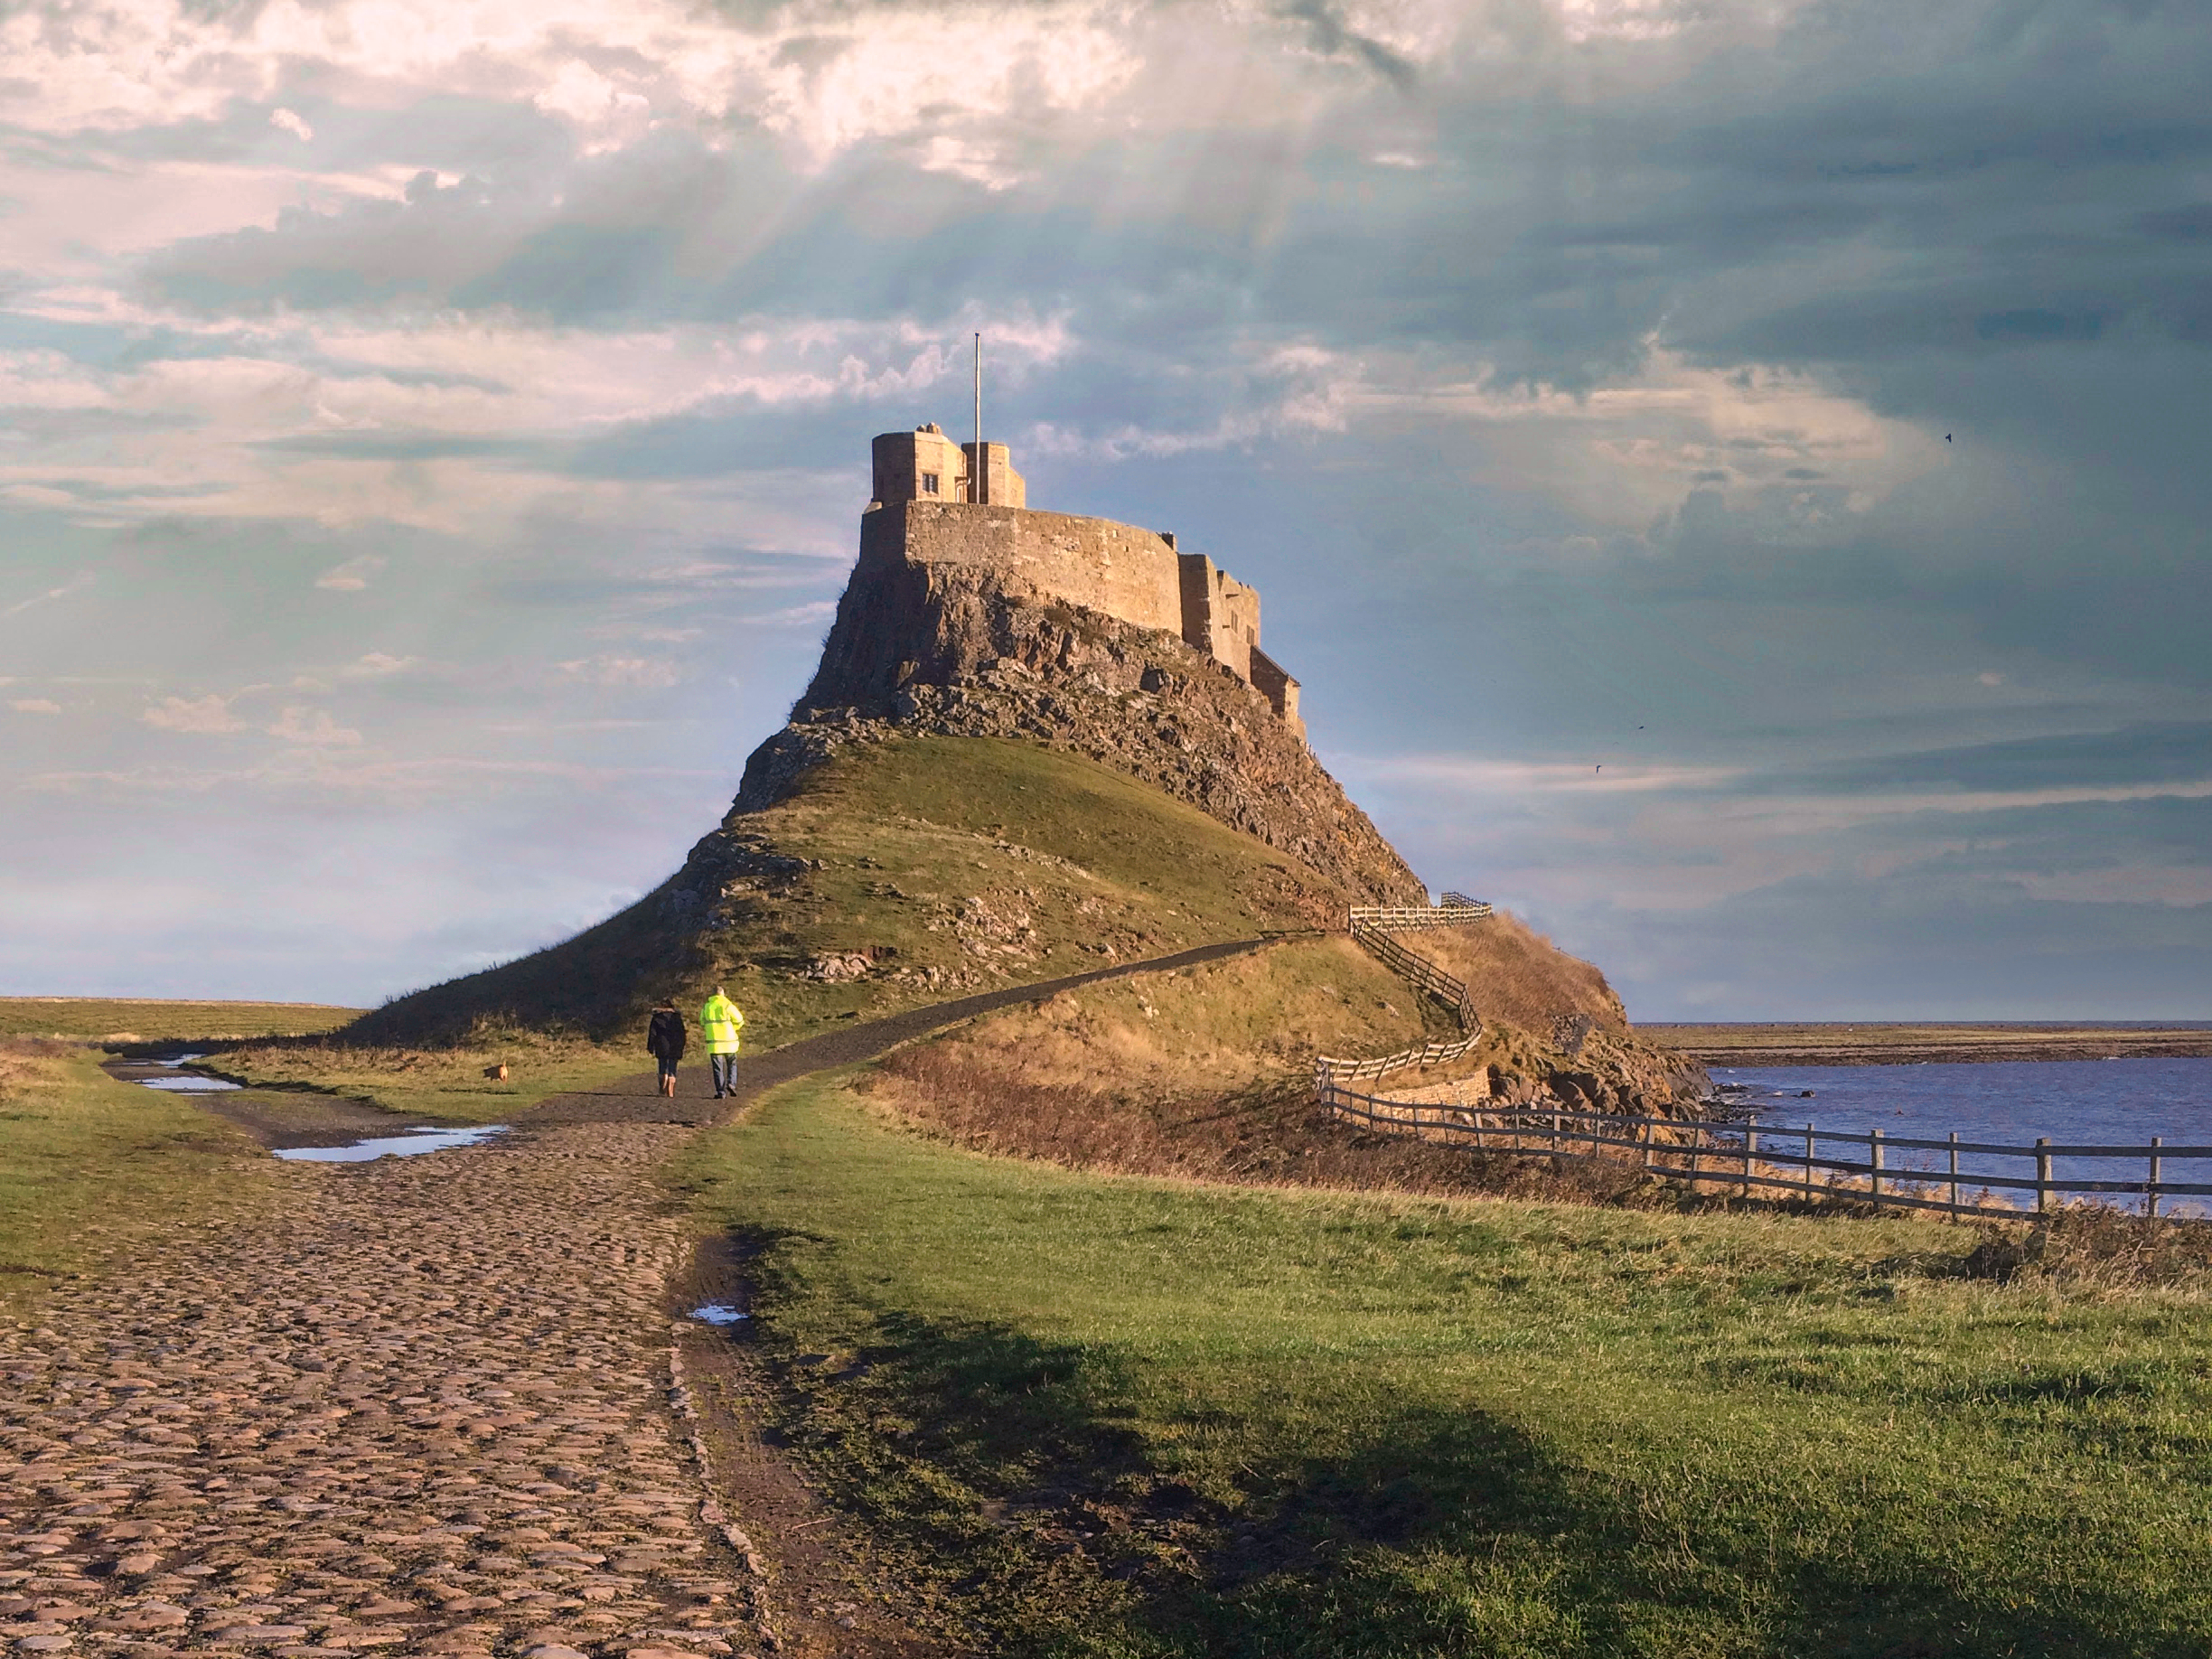 View towards Lindisfarne castle on a hill